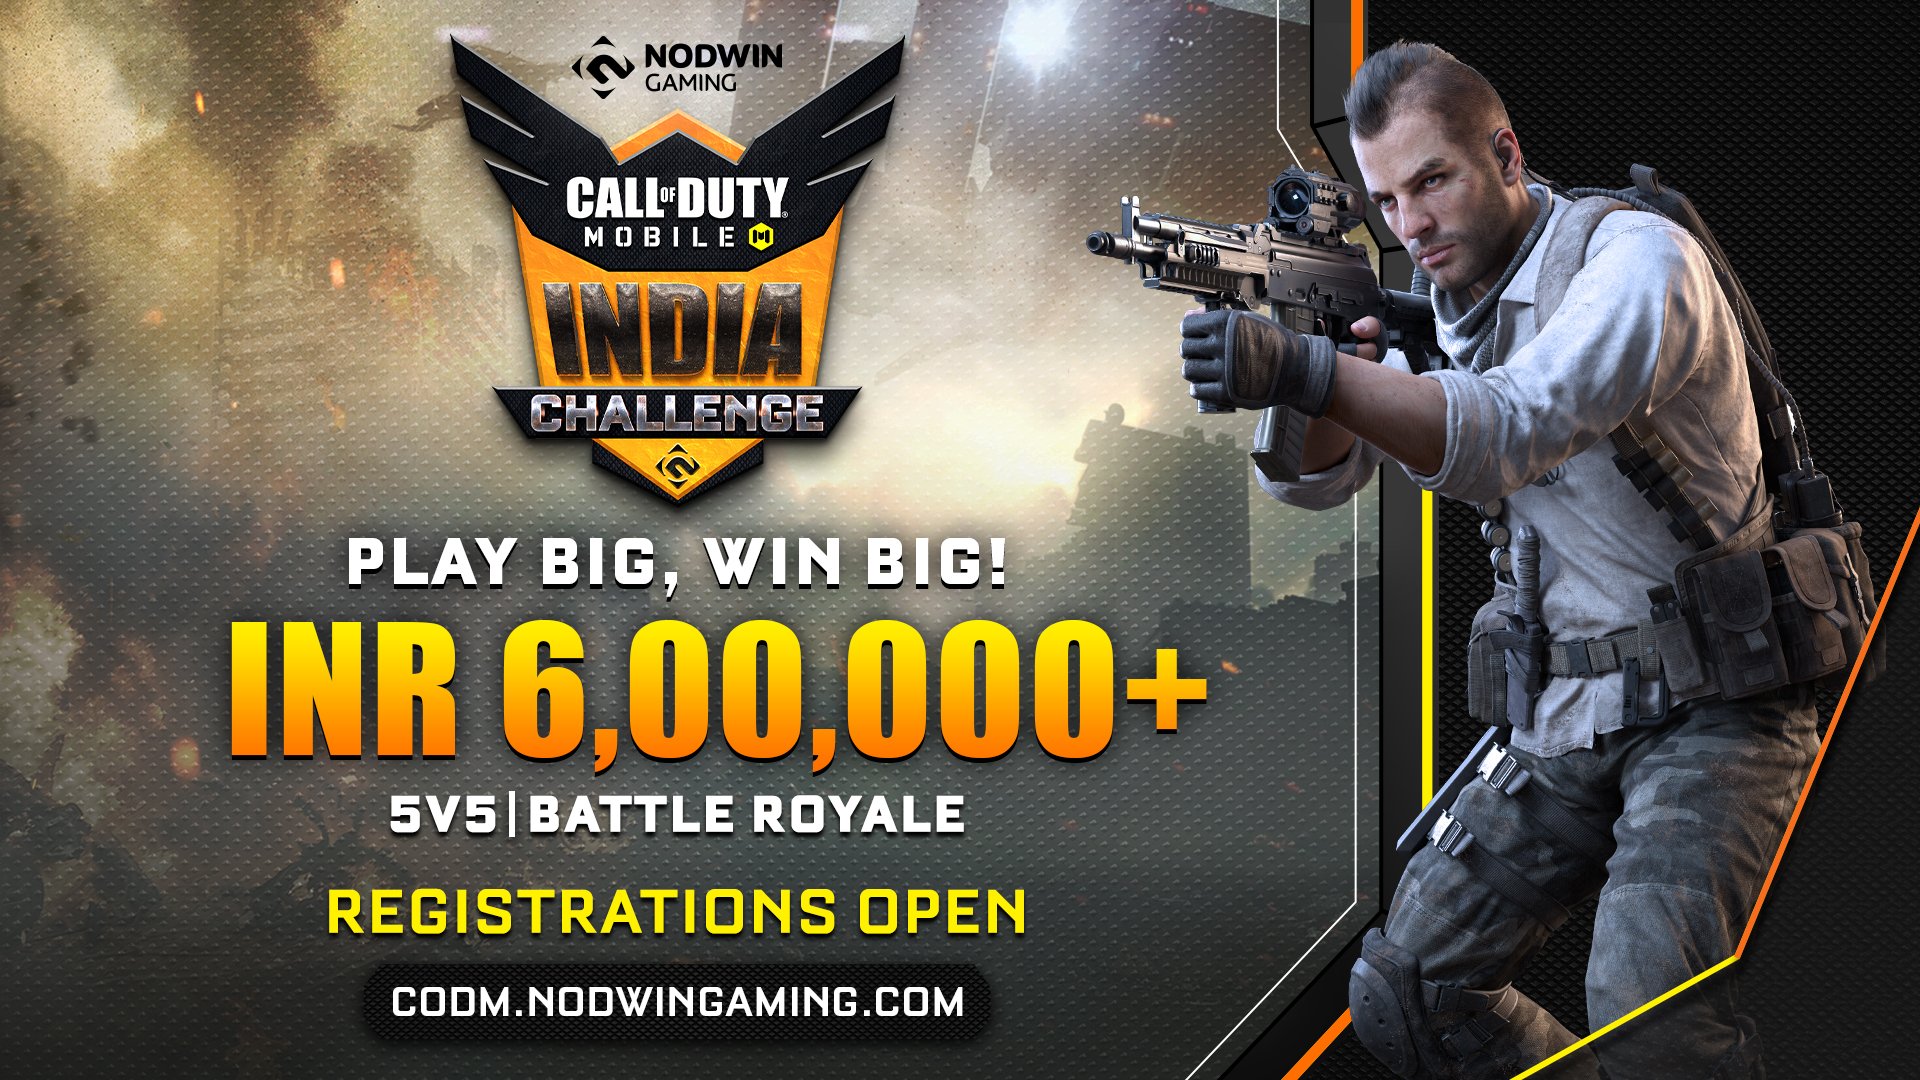 Call of Duty Mobile Challenge 2020 Tournament announced in India with a